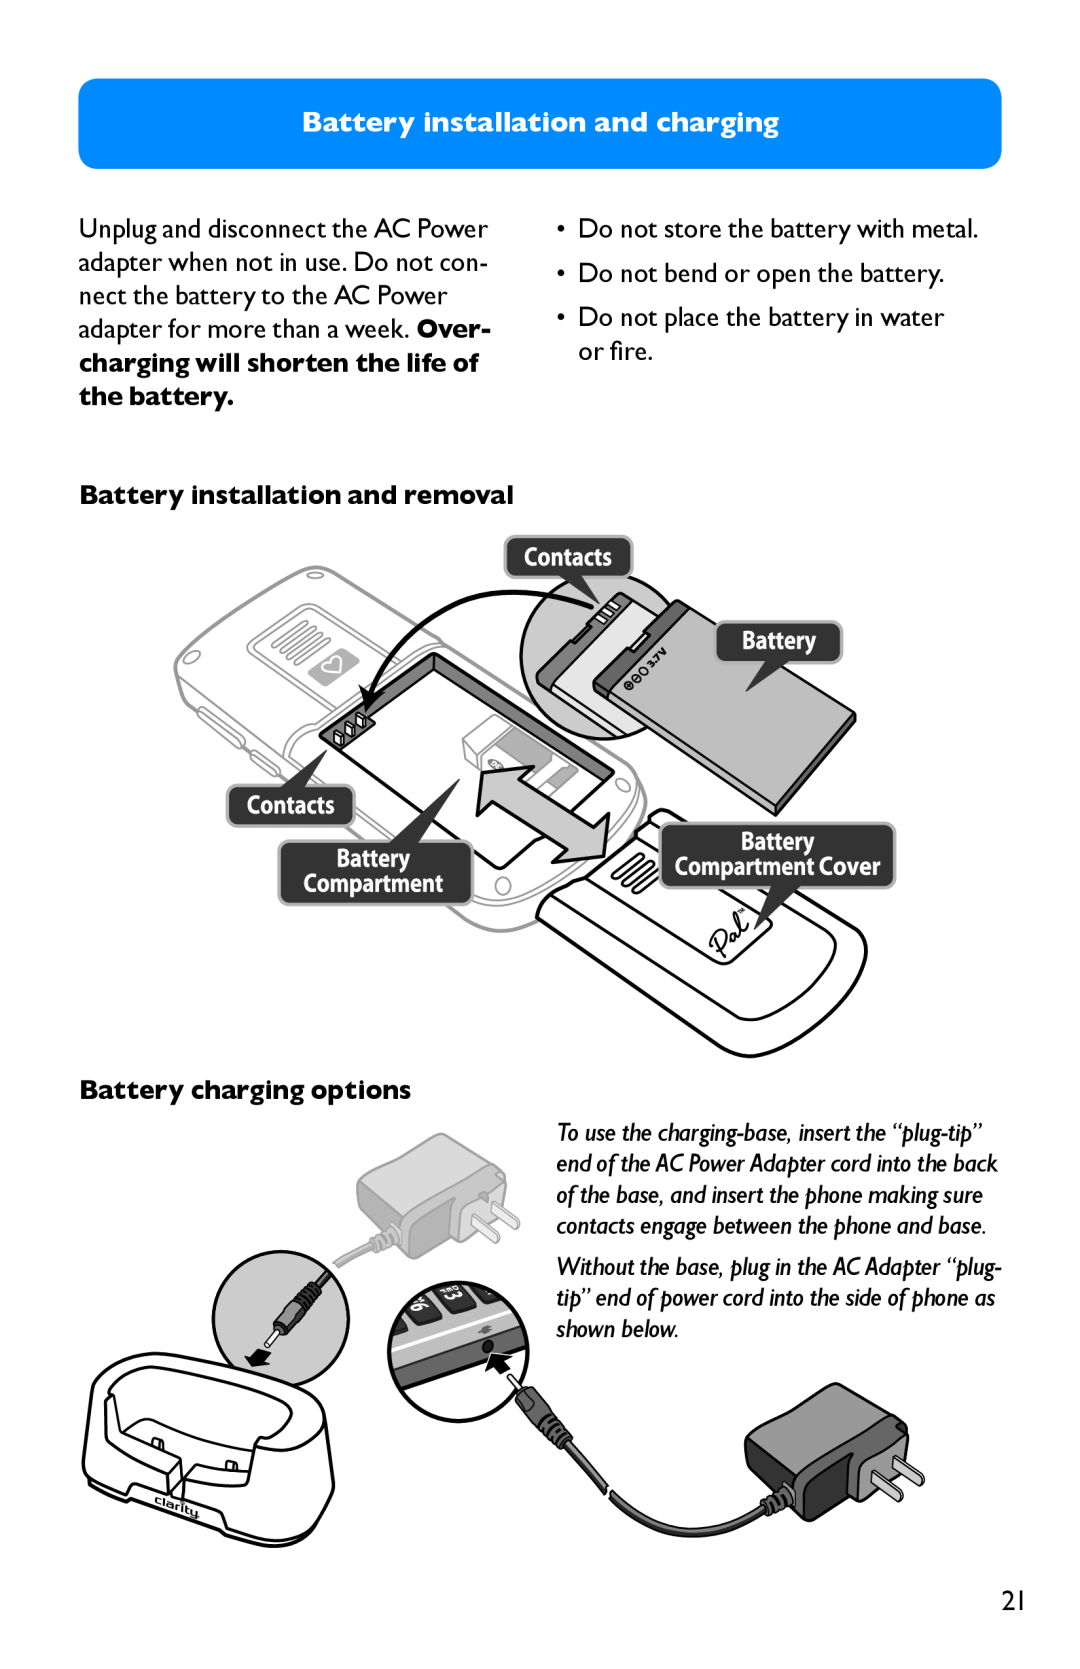 Clarity Pal manual Do not store the battery with metal Do not bend or open the battery, Battery installation and charging 